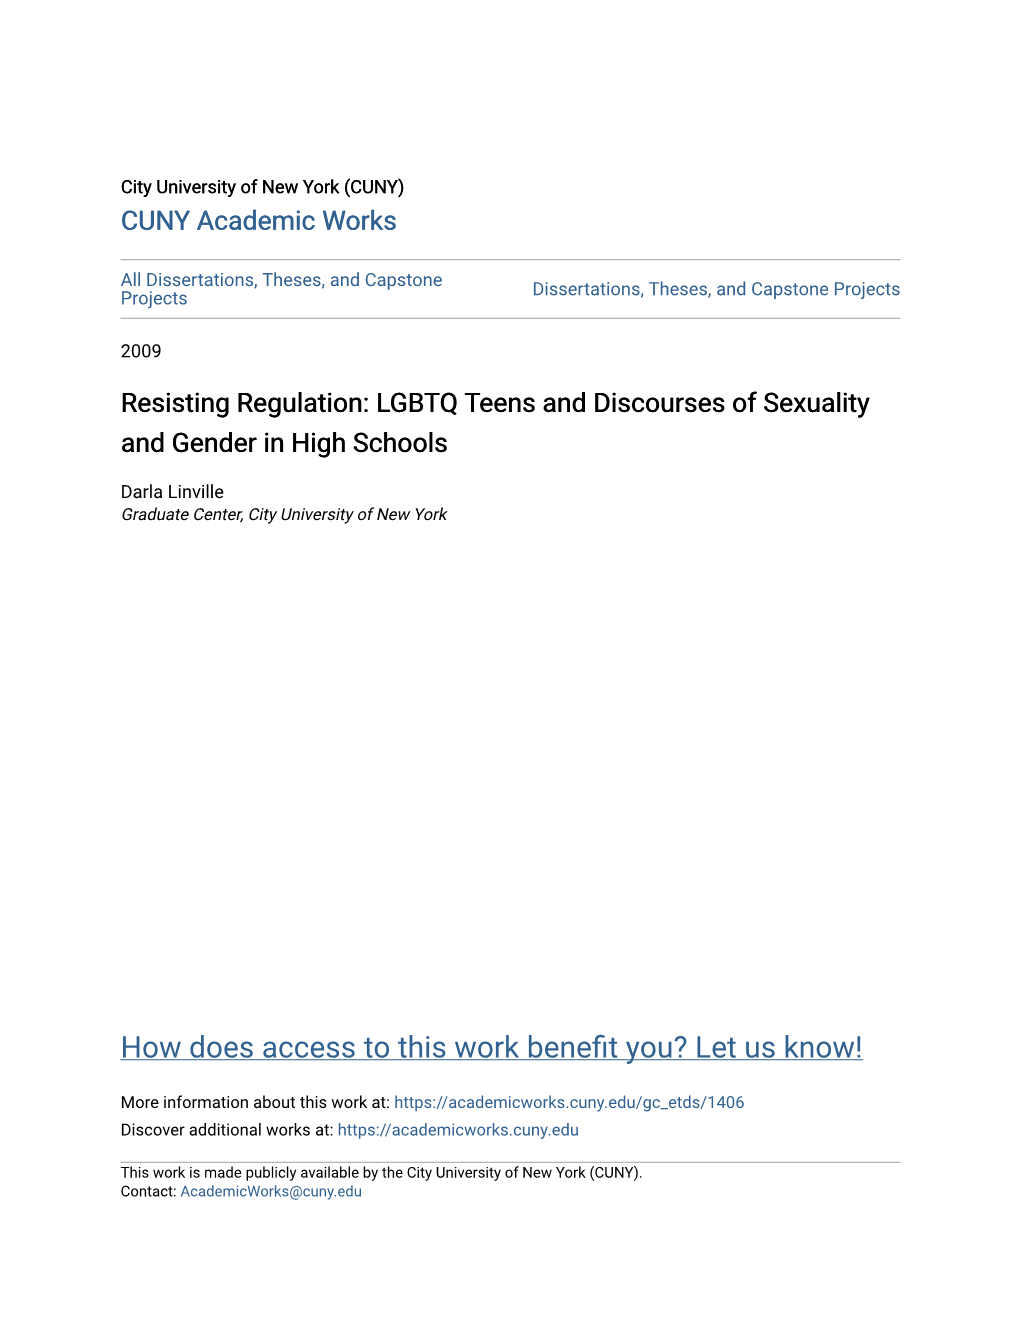 LGBTQ Teens and Discourses of Sexuality and Gender in High Schools